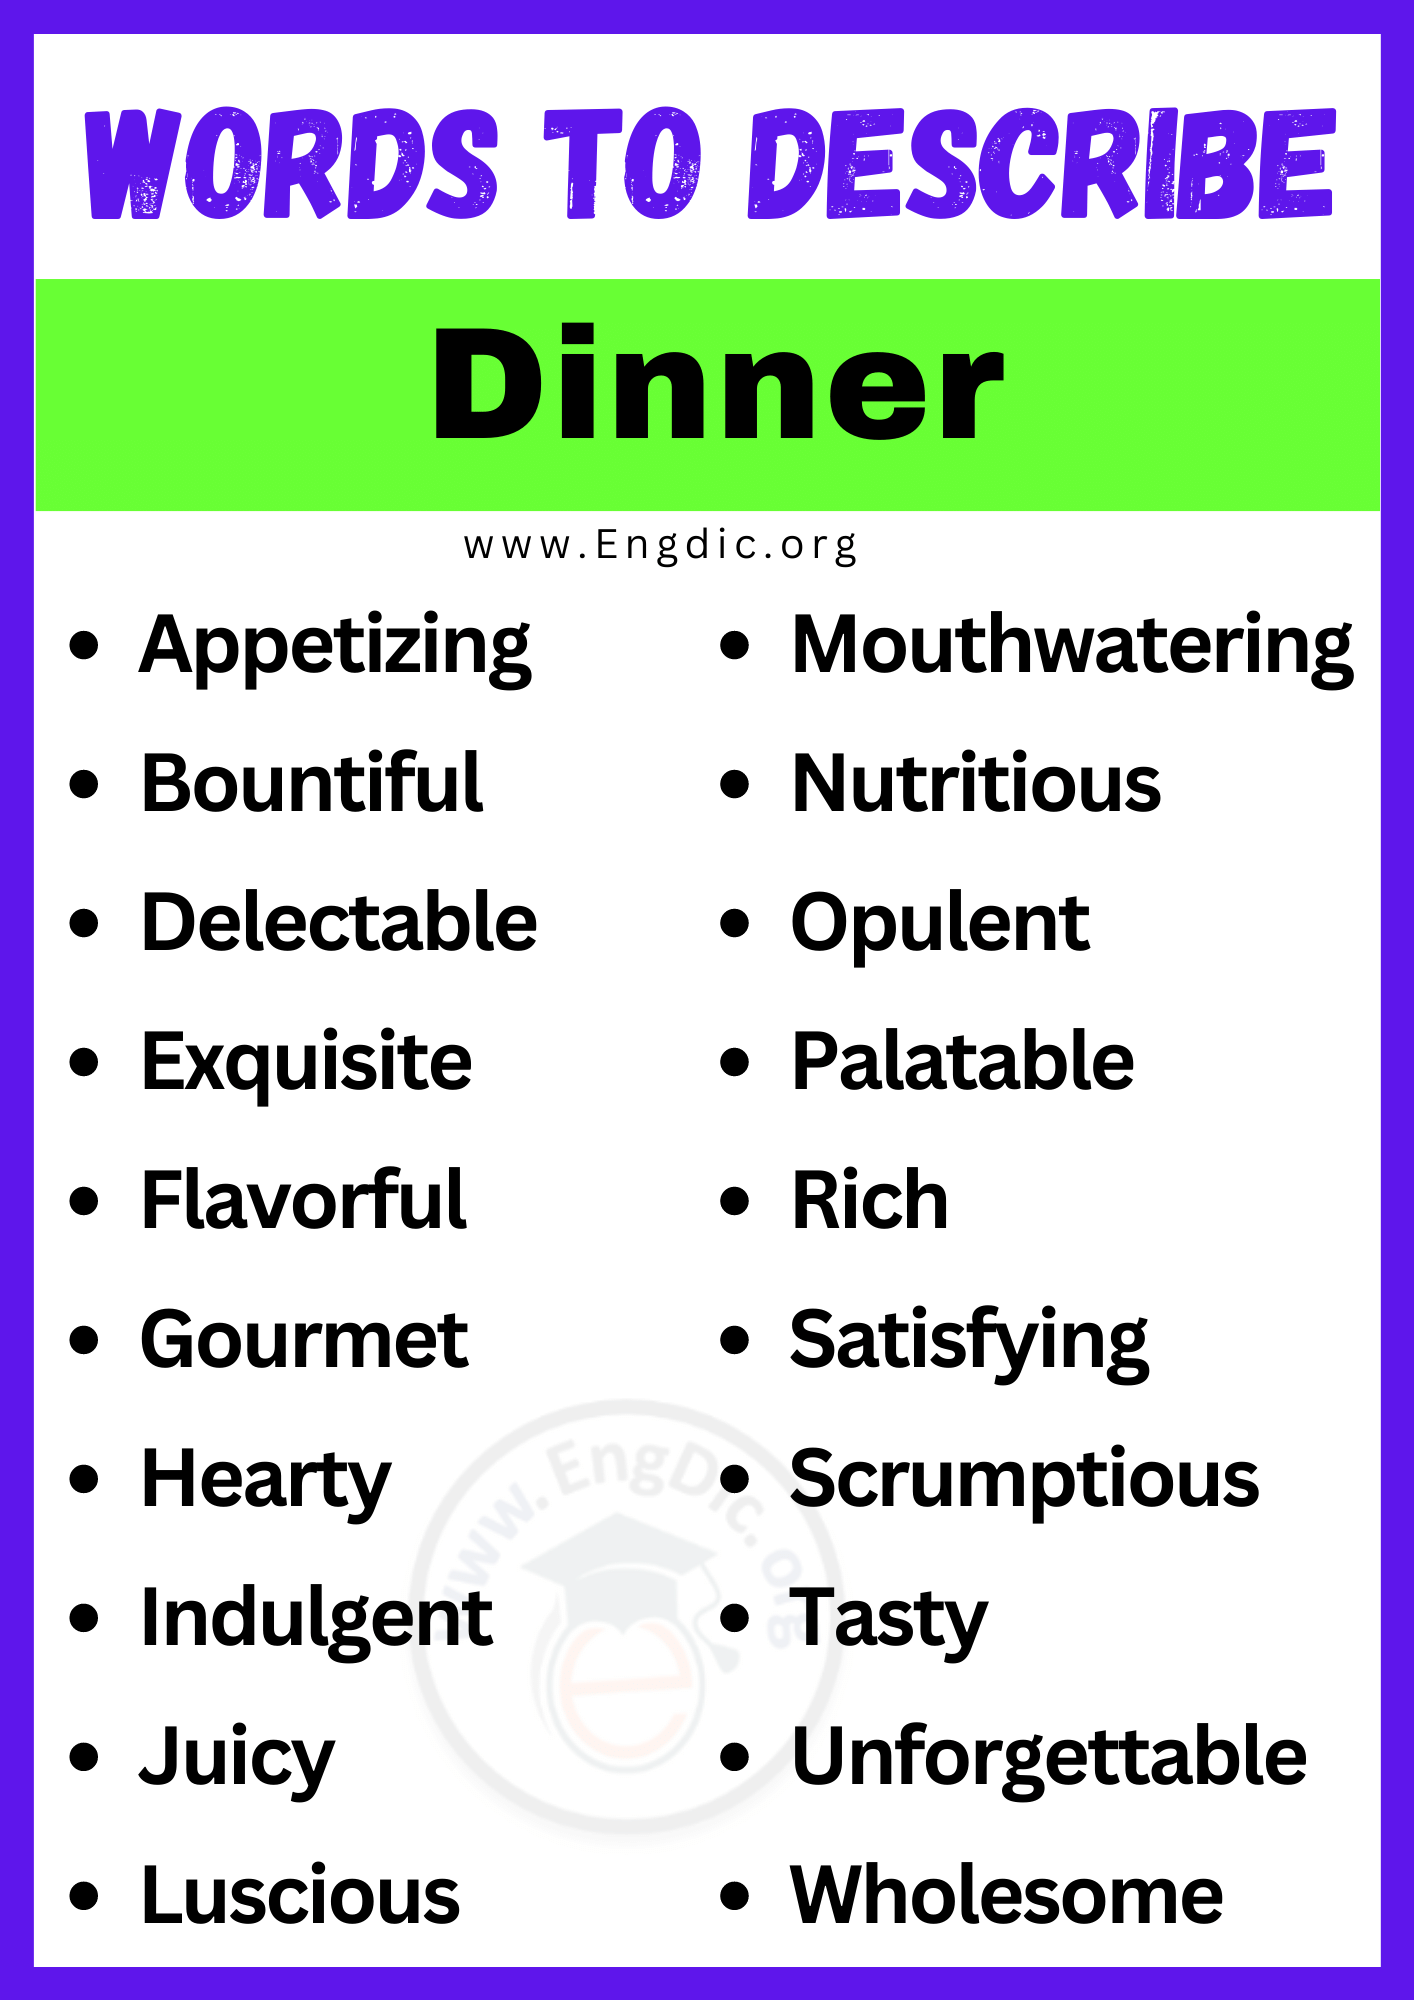 Words to Describe Dinner